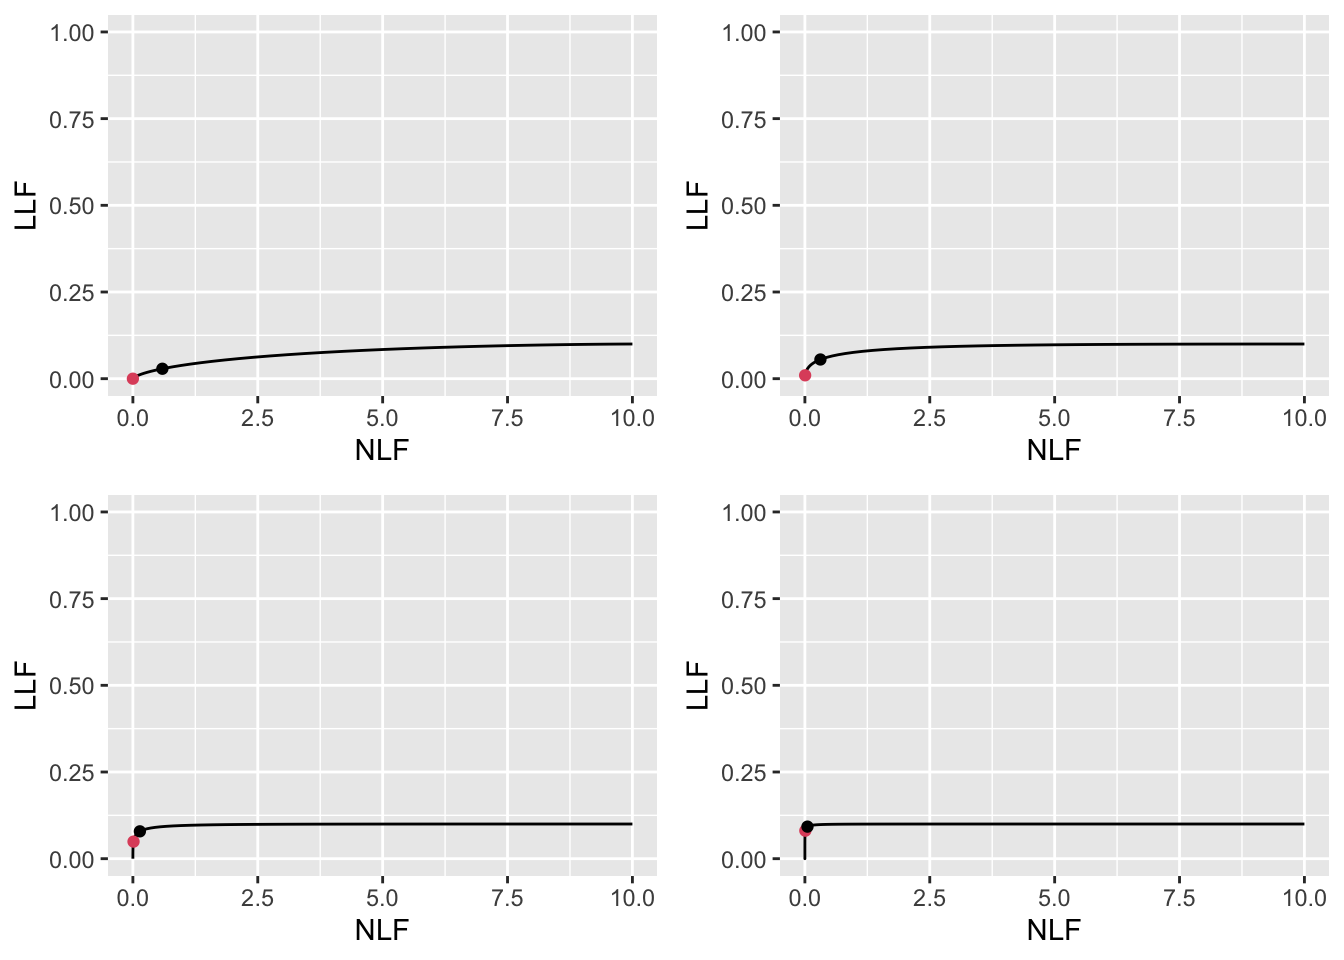 Low performance varying $\mu$ FROC plots with superimposed operating points. The red dot corresponds to $\text{wAFROC}_\text{AUC}$ optimization and the black dot to Youden-index optimization. The values of $\mu$ are: top-left $\mu = 1$, top-right $\mu = 2$, bottom-left $\mu = 3$ and bottom-right $\mu = 4$.